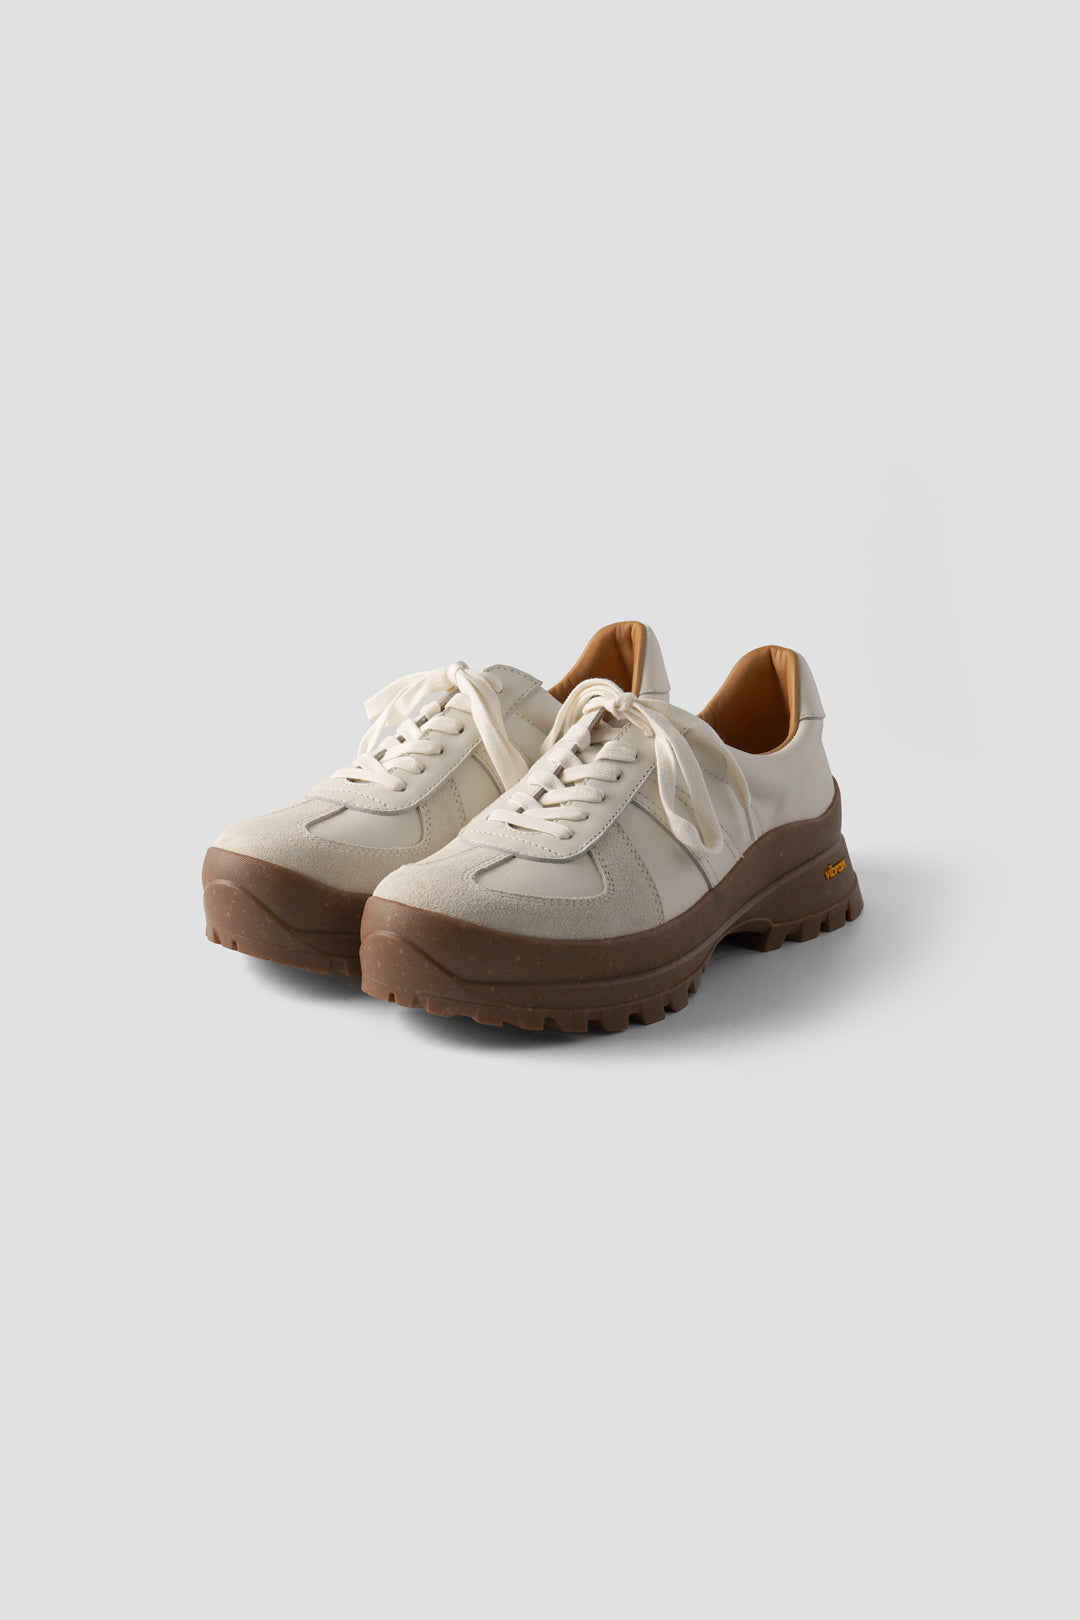 "G" TM-SHOES-0011V884C WHITE / RECYCLE RUBBER